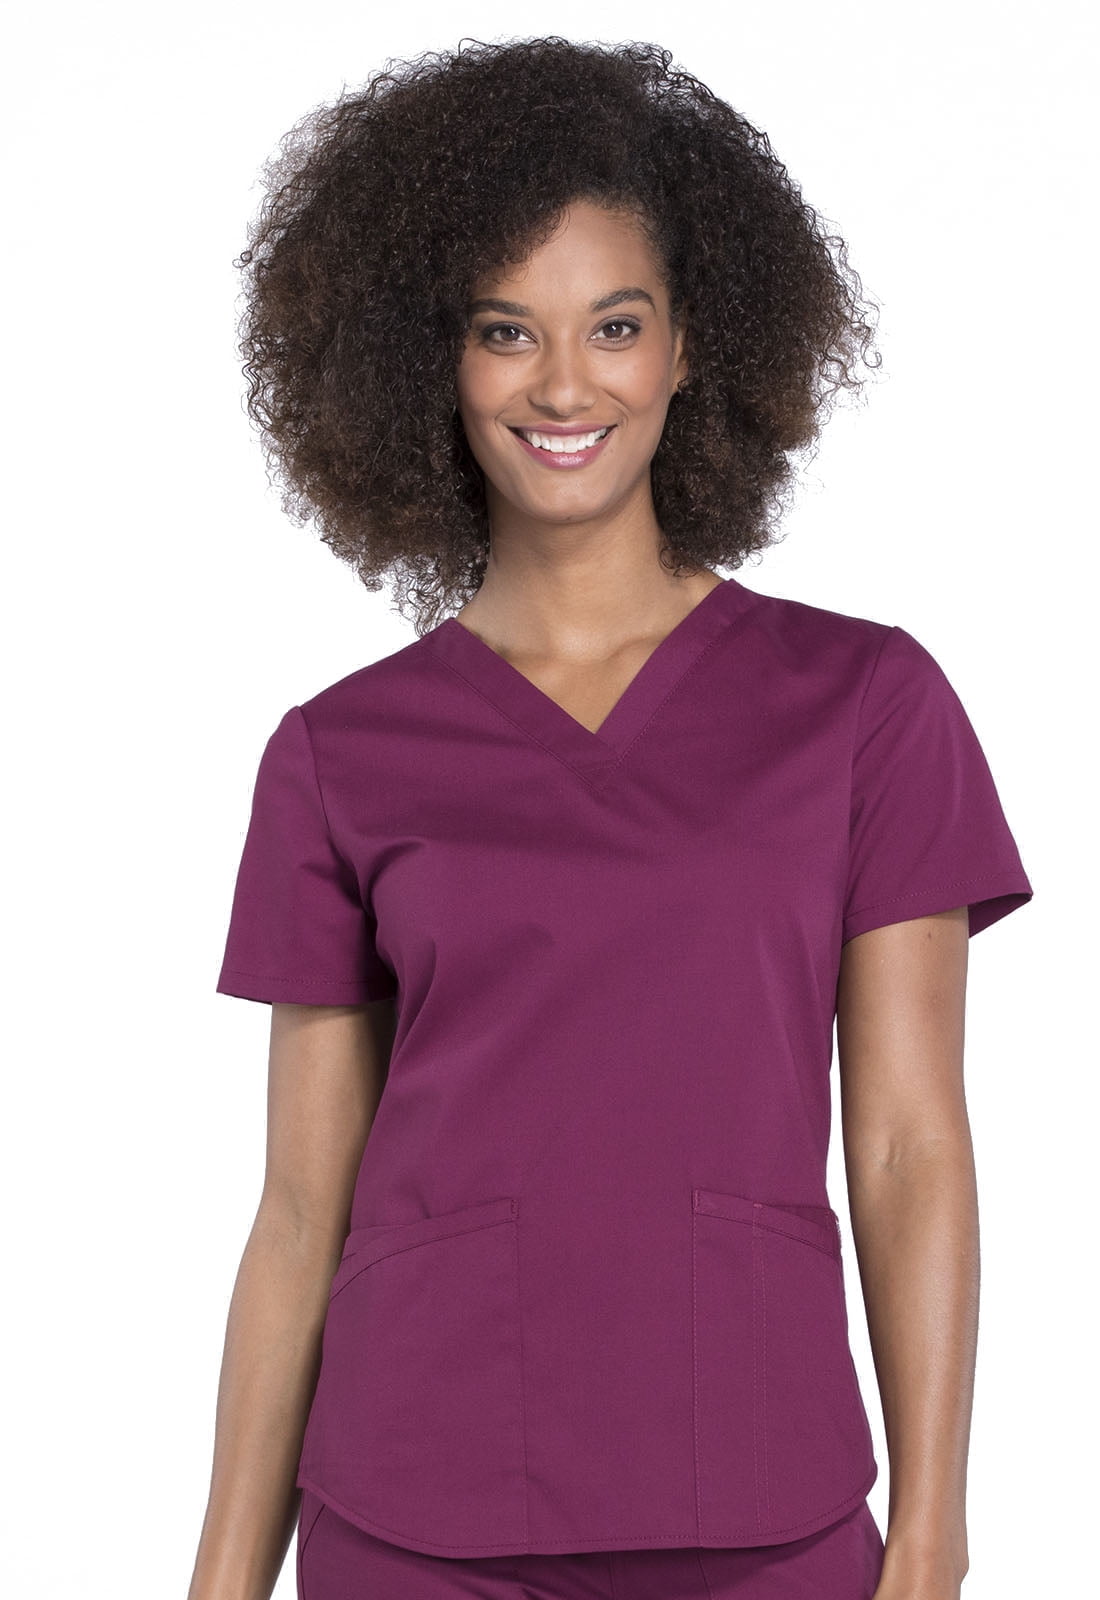 WW665 FREE SHIPPING! Cherokee Professionals Women's V-Neck Solid Scrub Top 